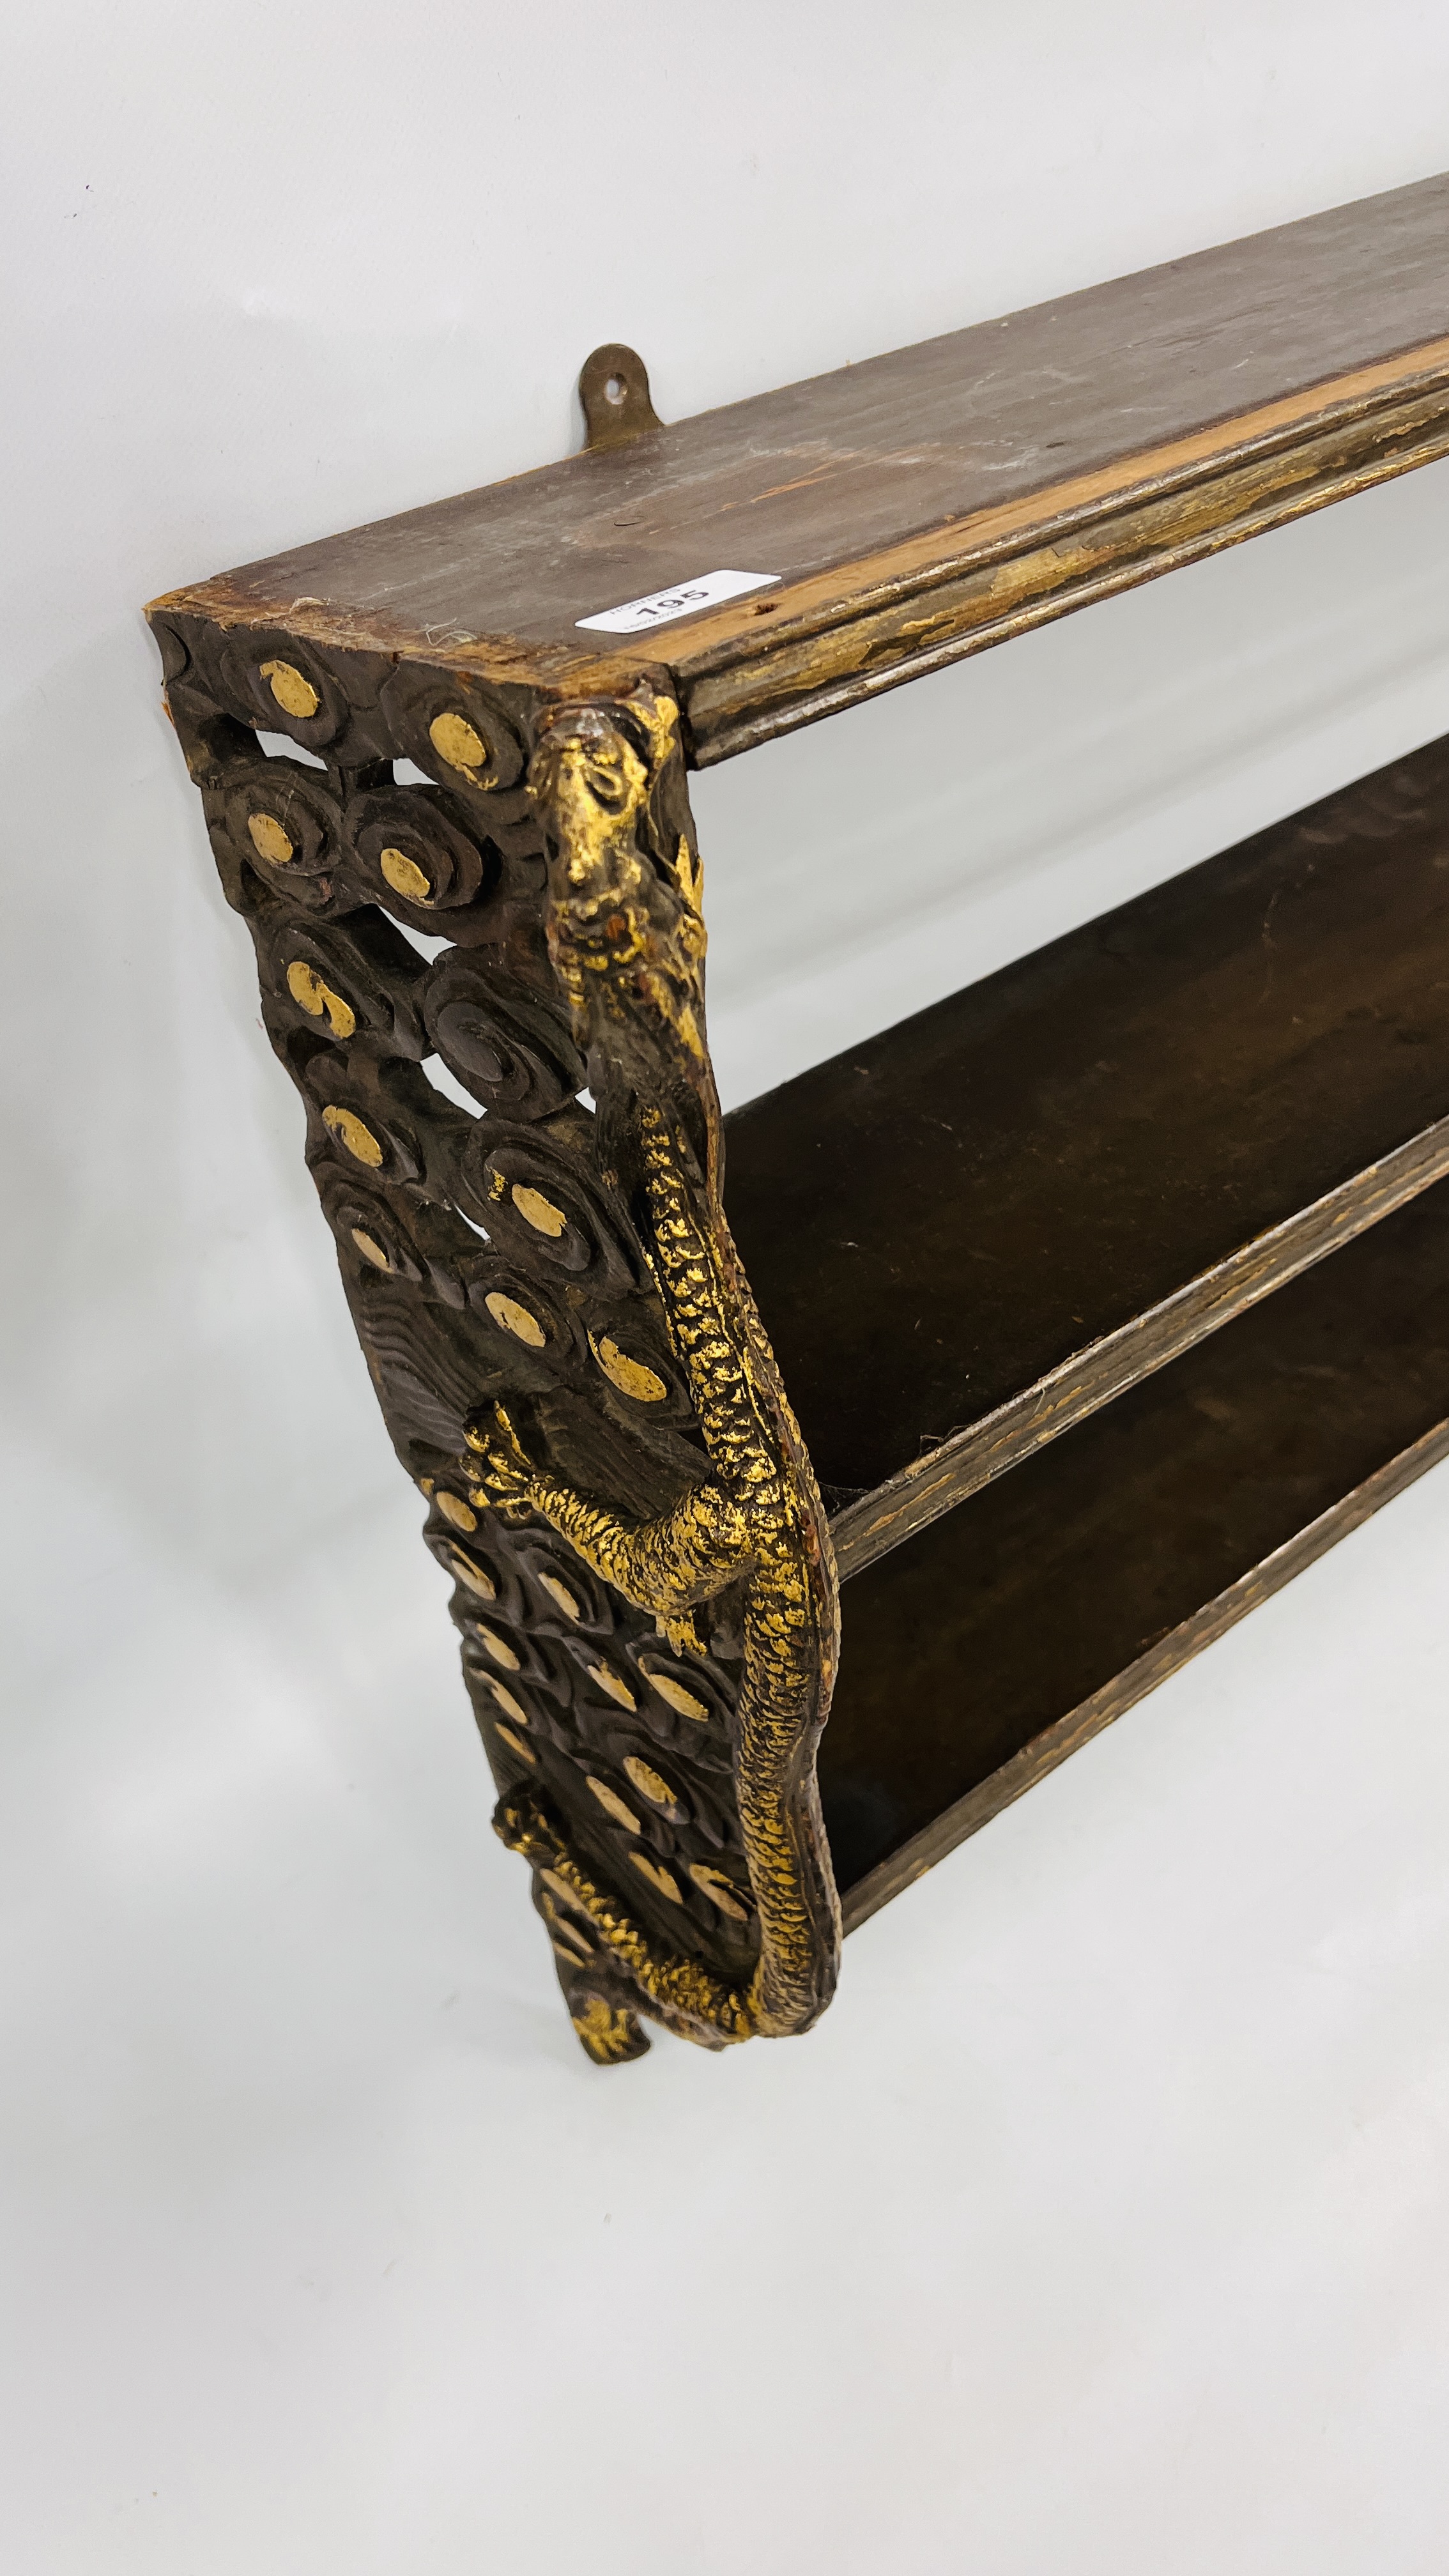 C20TH CHINESE STYLE THREE TIER BRACKET SHELF WITH DRAGON CARVED DETAIL - W 117CM. H 60CM. D 24CM. - Image 9 of 9